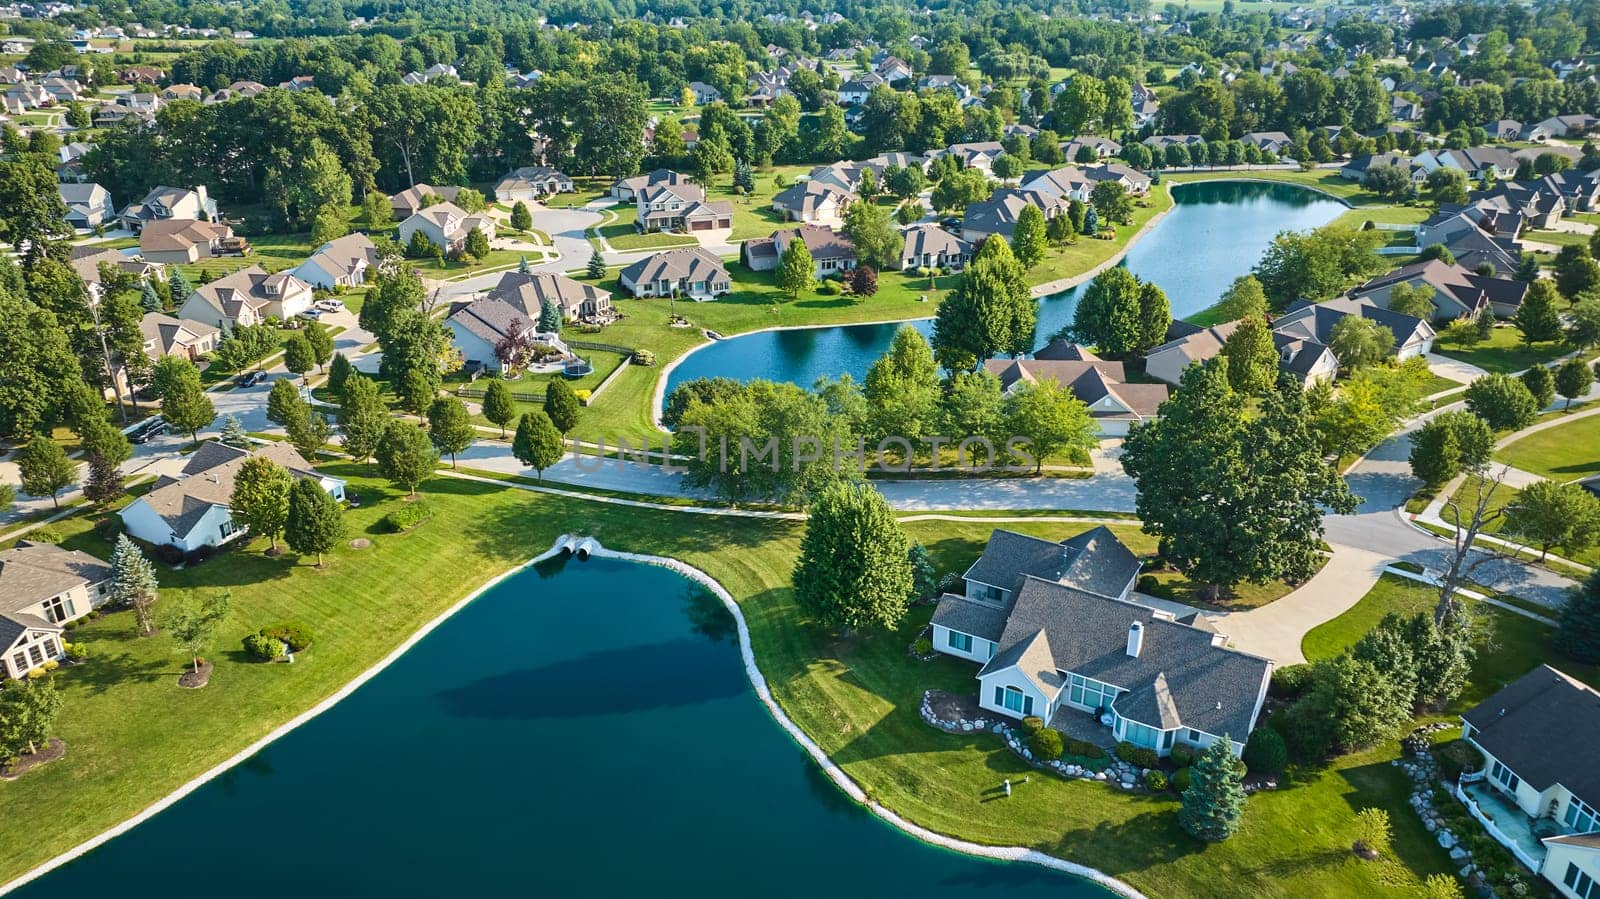 Image of Large neighborhoods with two ponds and multiple houses aerial